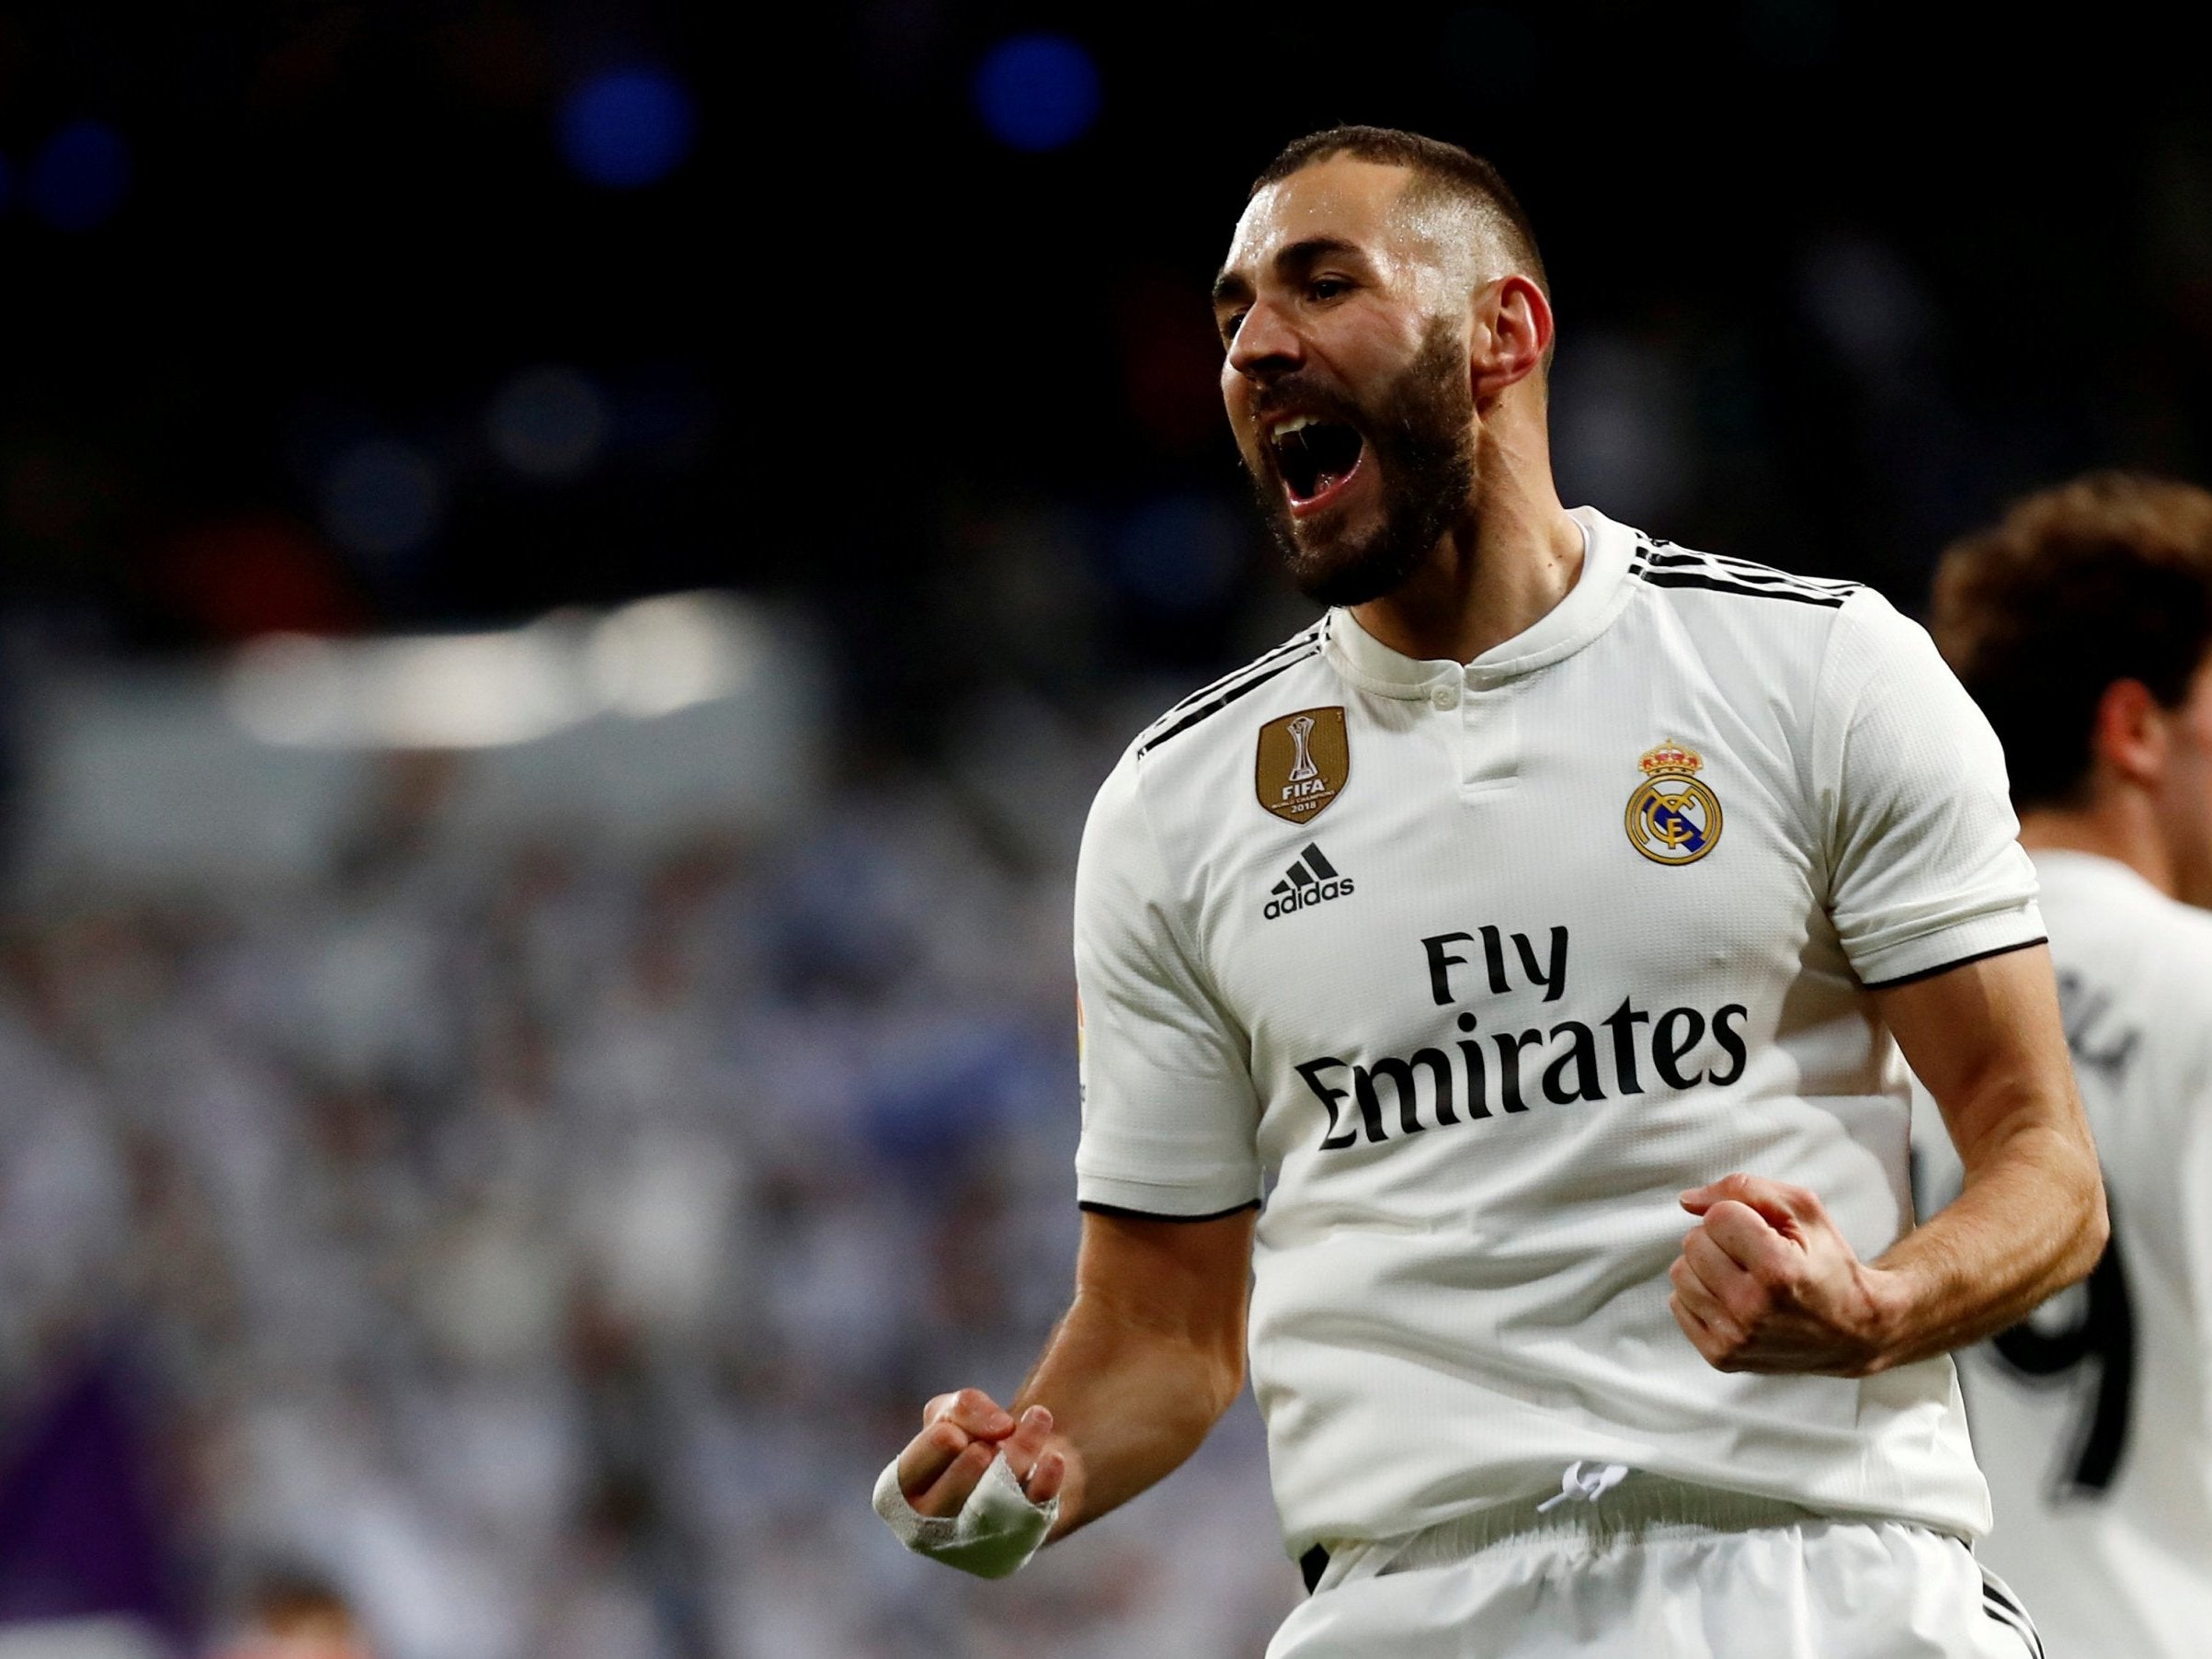 Karim Benzema will start up front for Real Madrid